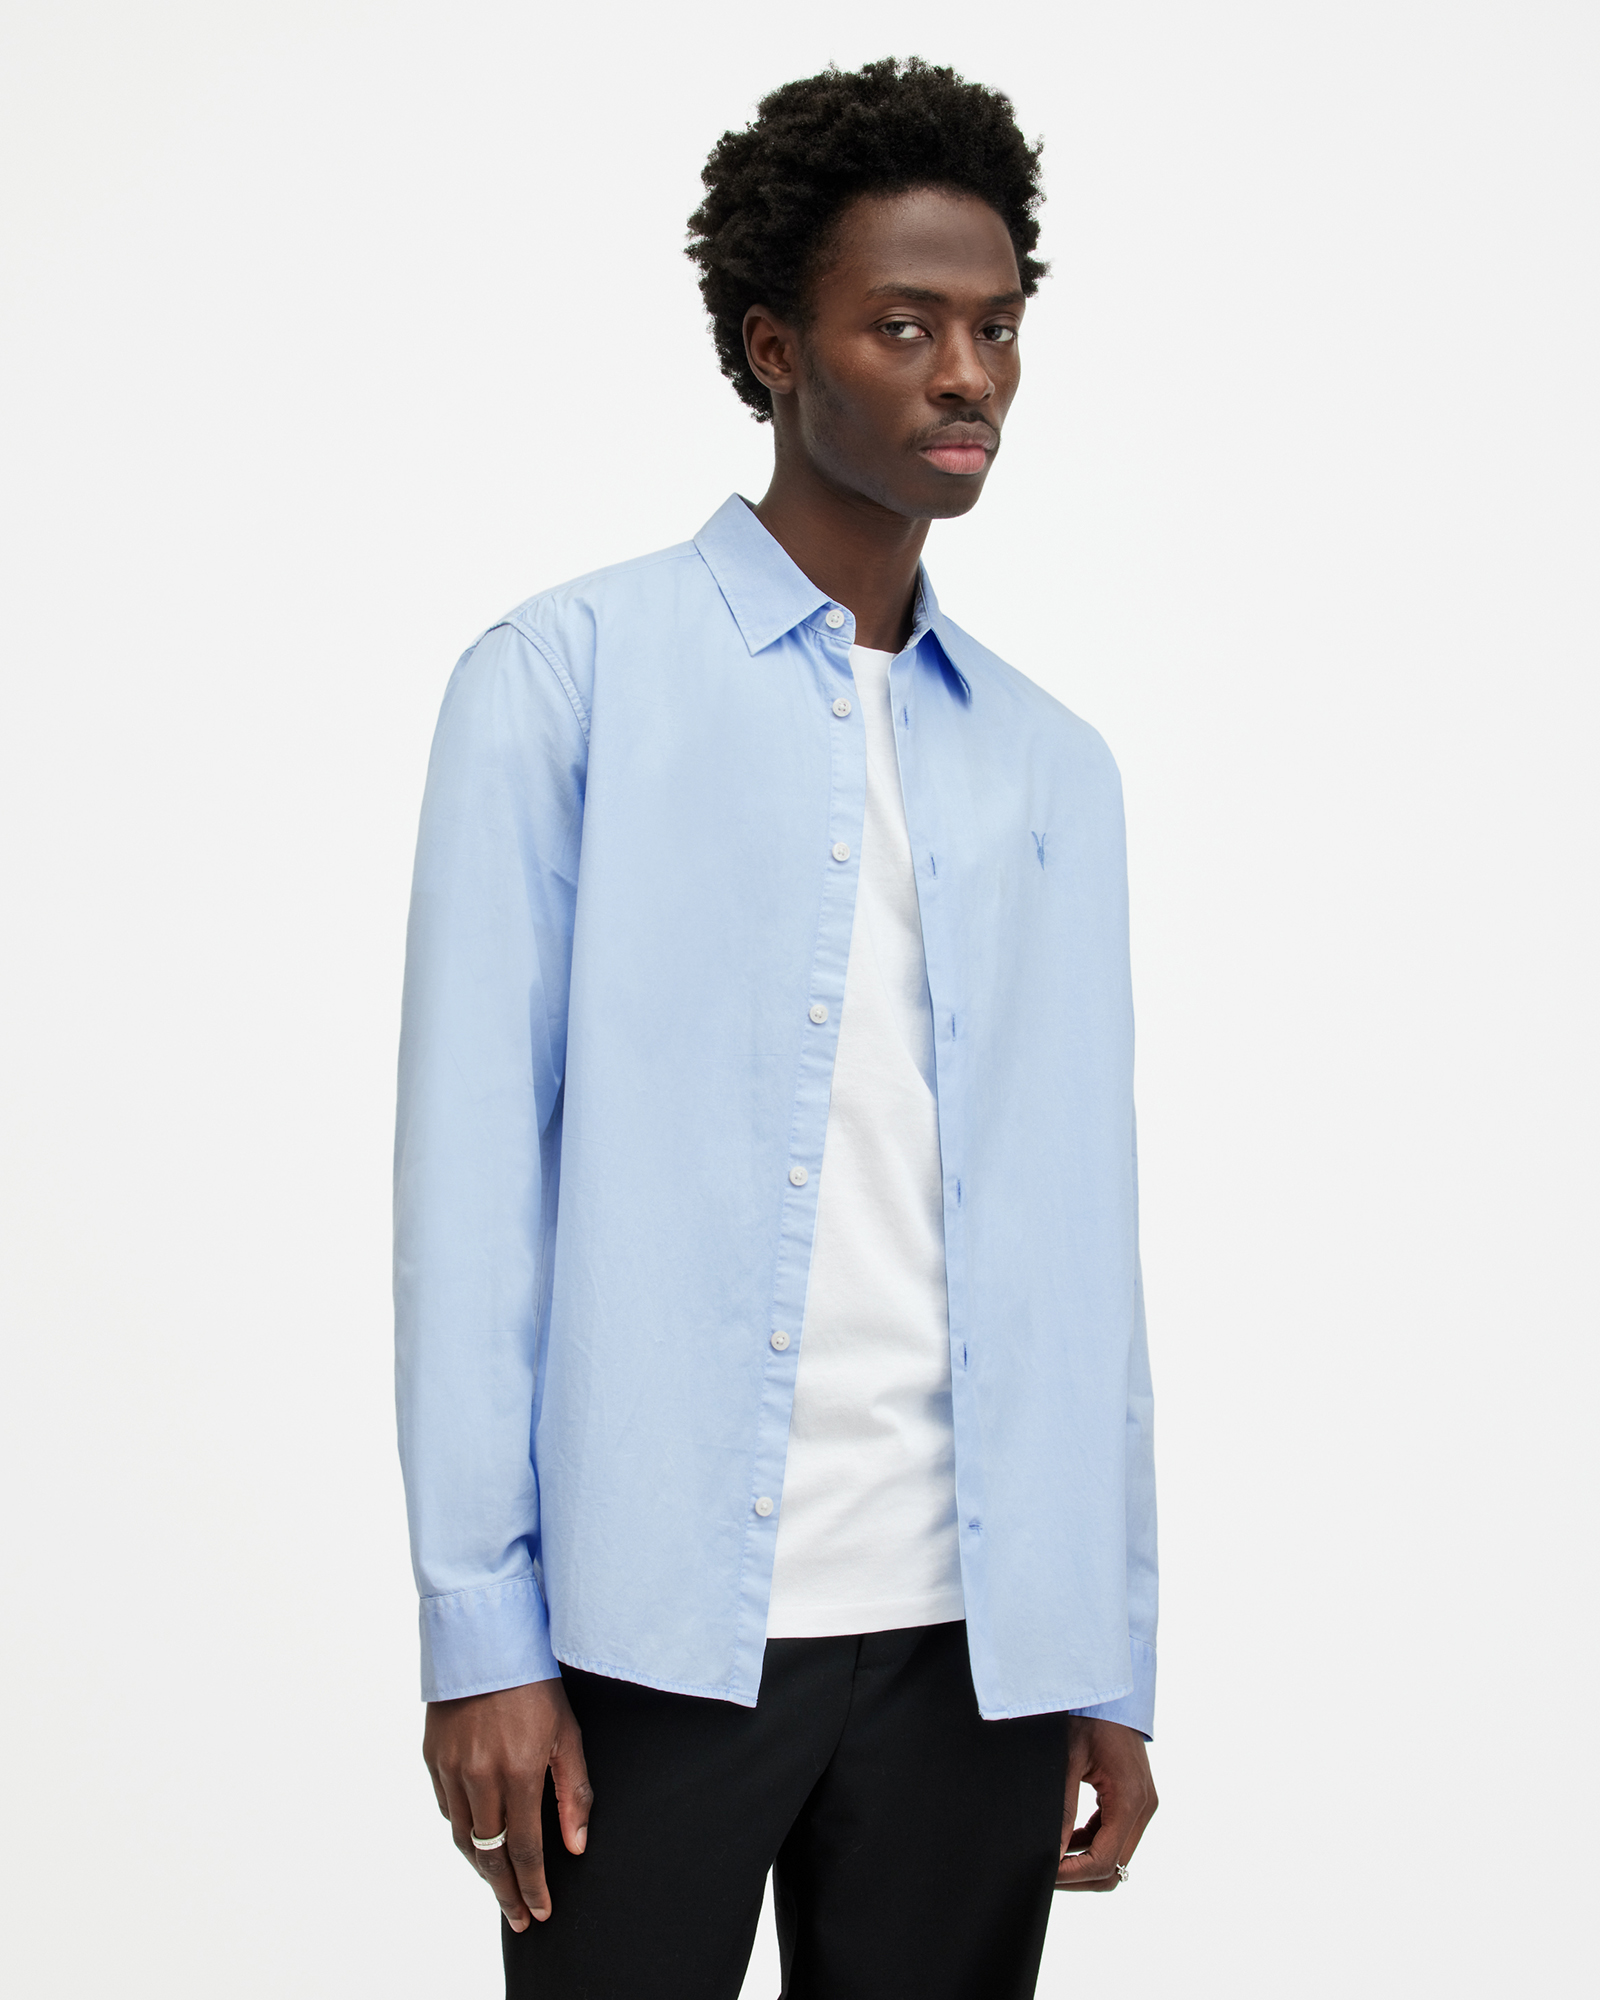 AllSaints Tahoe Garment Dyed Relaxed Fit Shirt